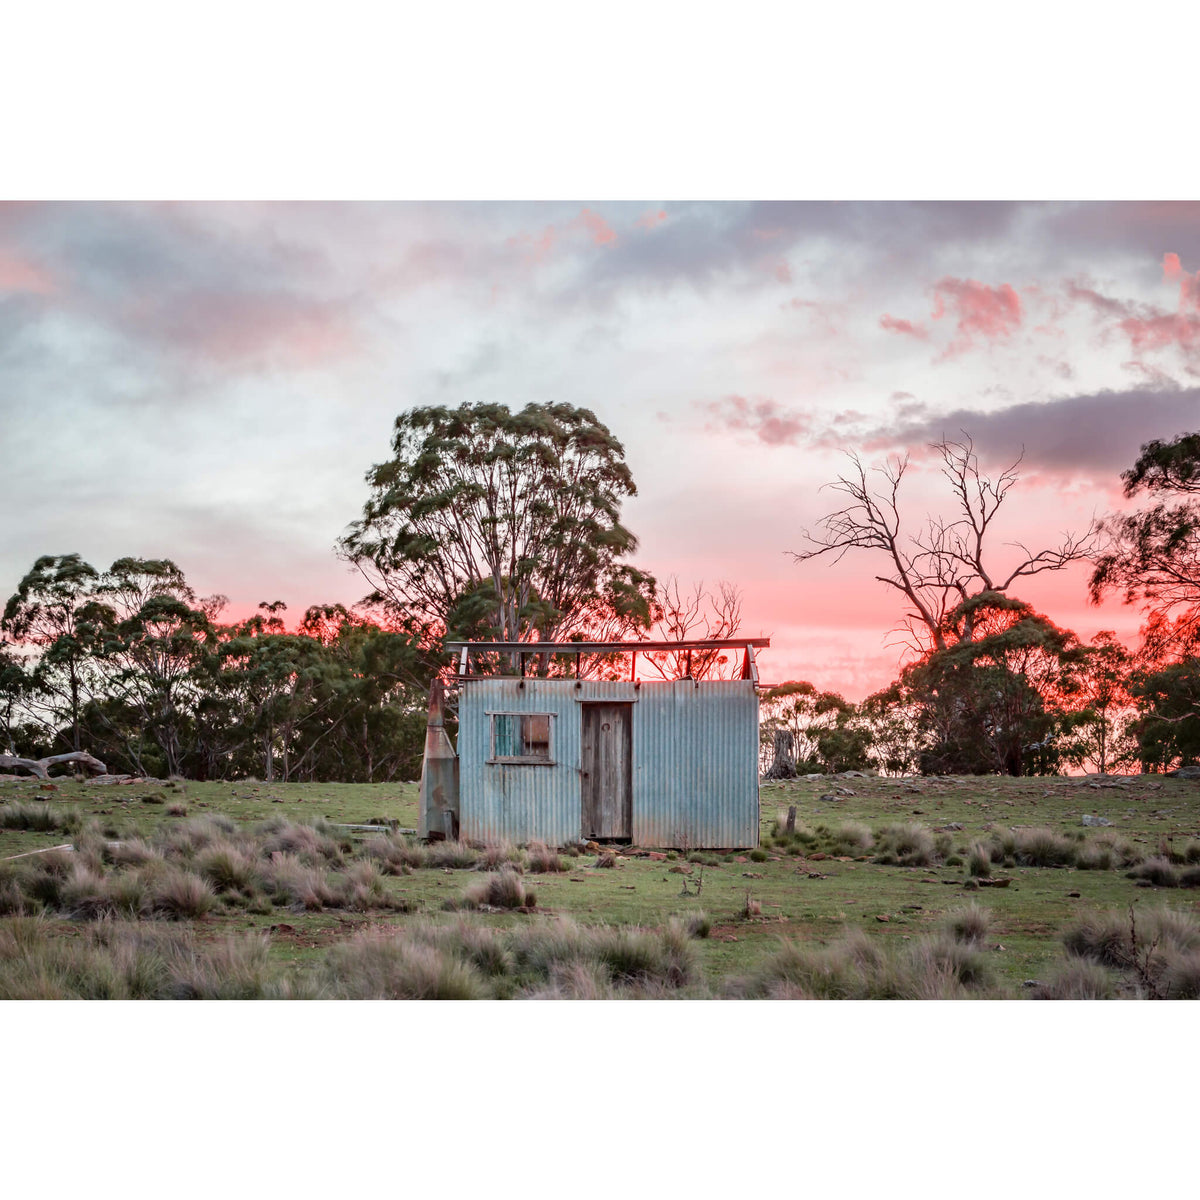 Gunningrah Drover&#39;s Hut | A Place To Call Home Fine Art Print - Lost Collective Shop